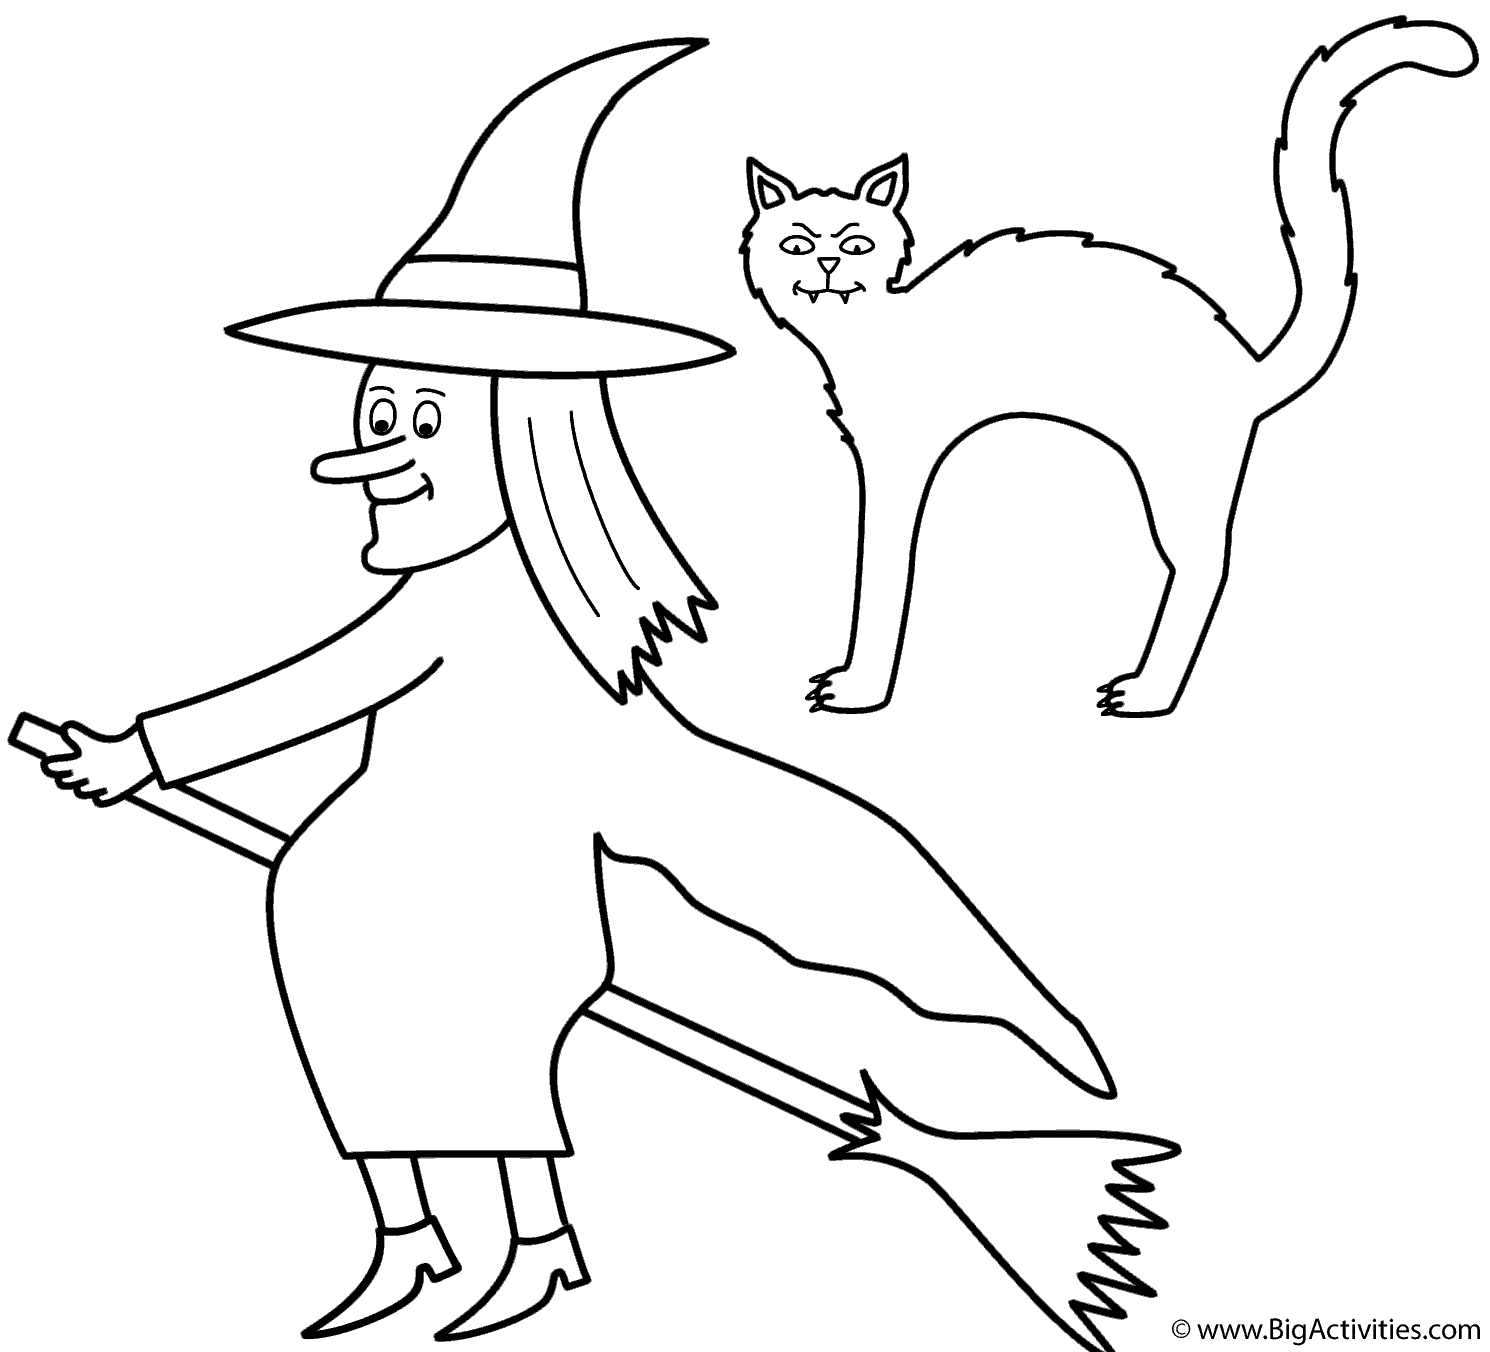 Witch on broom with black cat